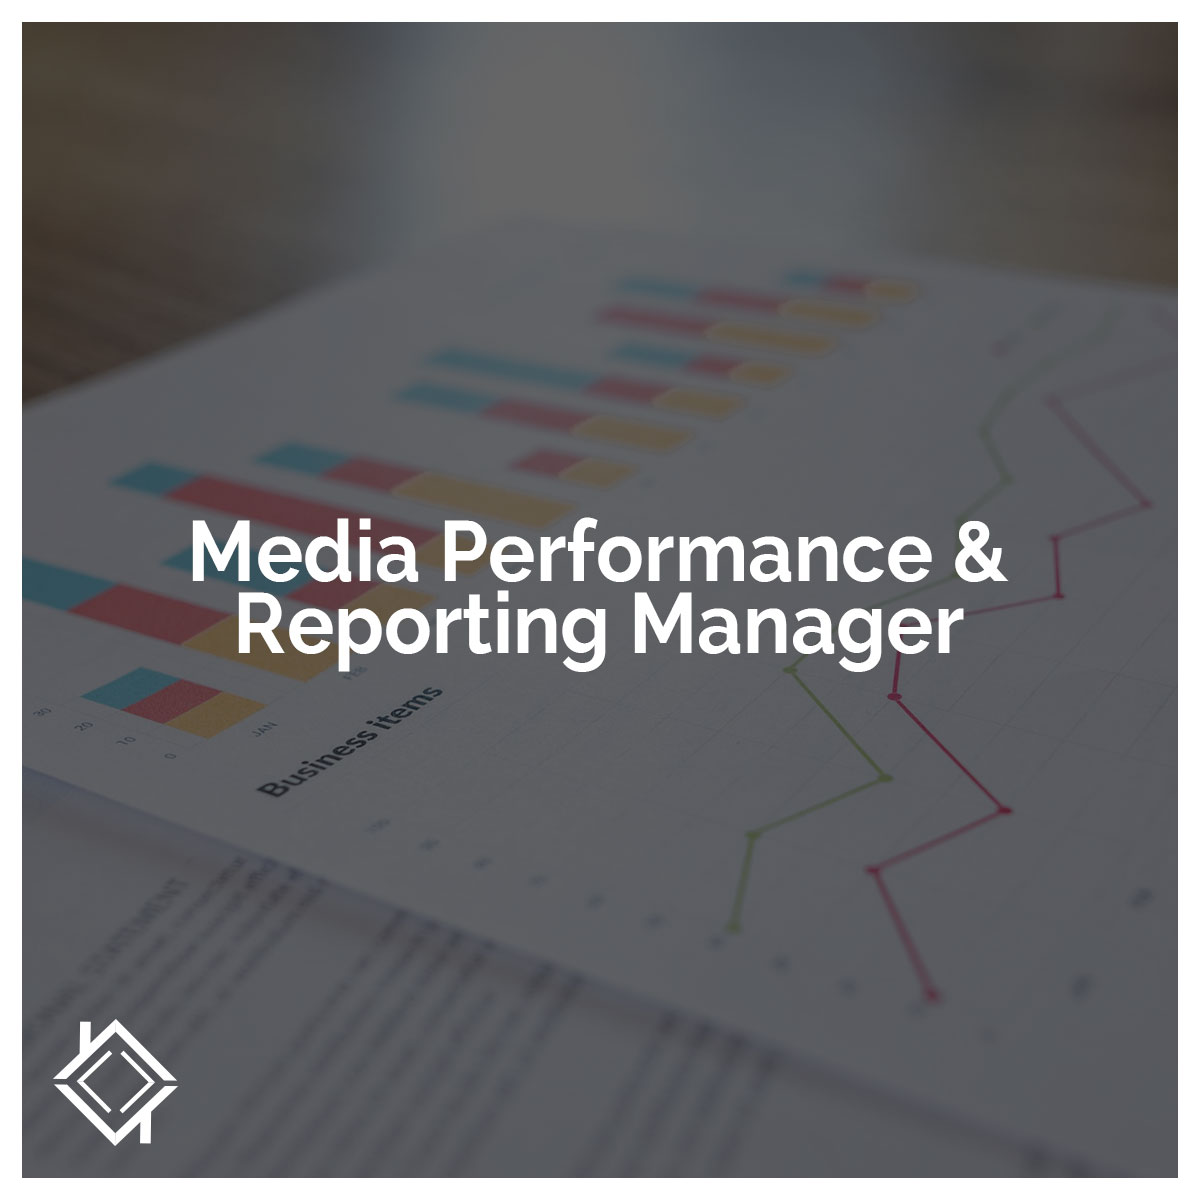 Media Performance and Reporting Manager written in white over an image with a report showing graphs